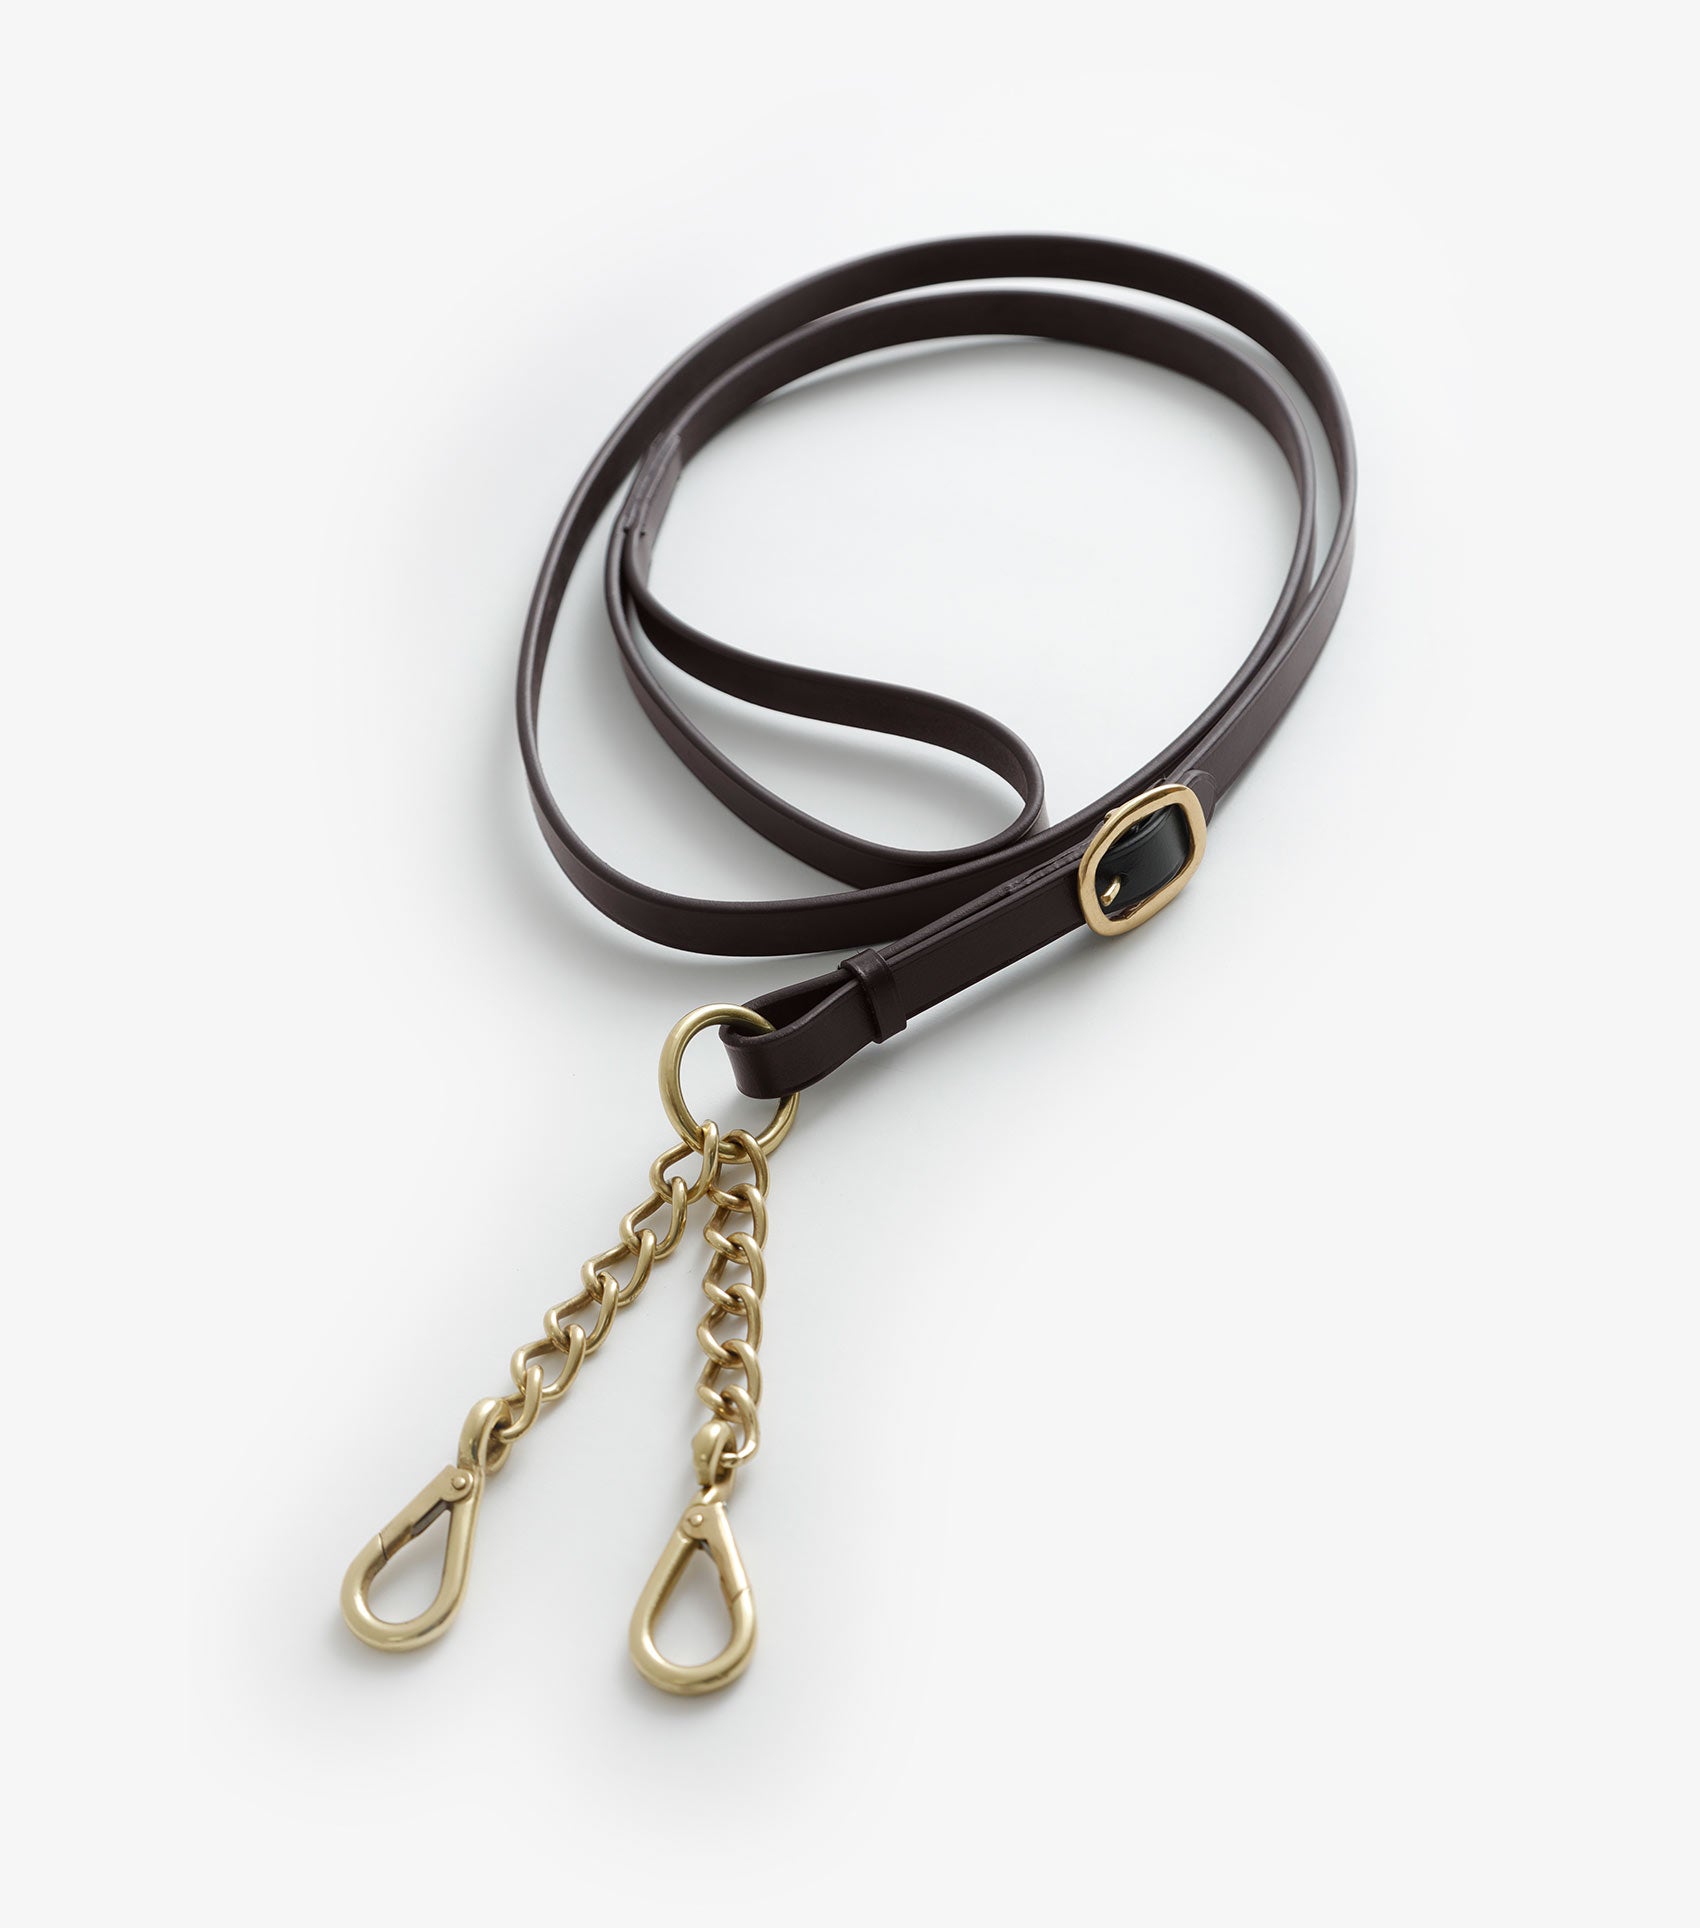 PE - Leather Lead Rein with Chain Coupling